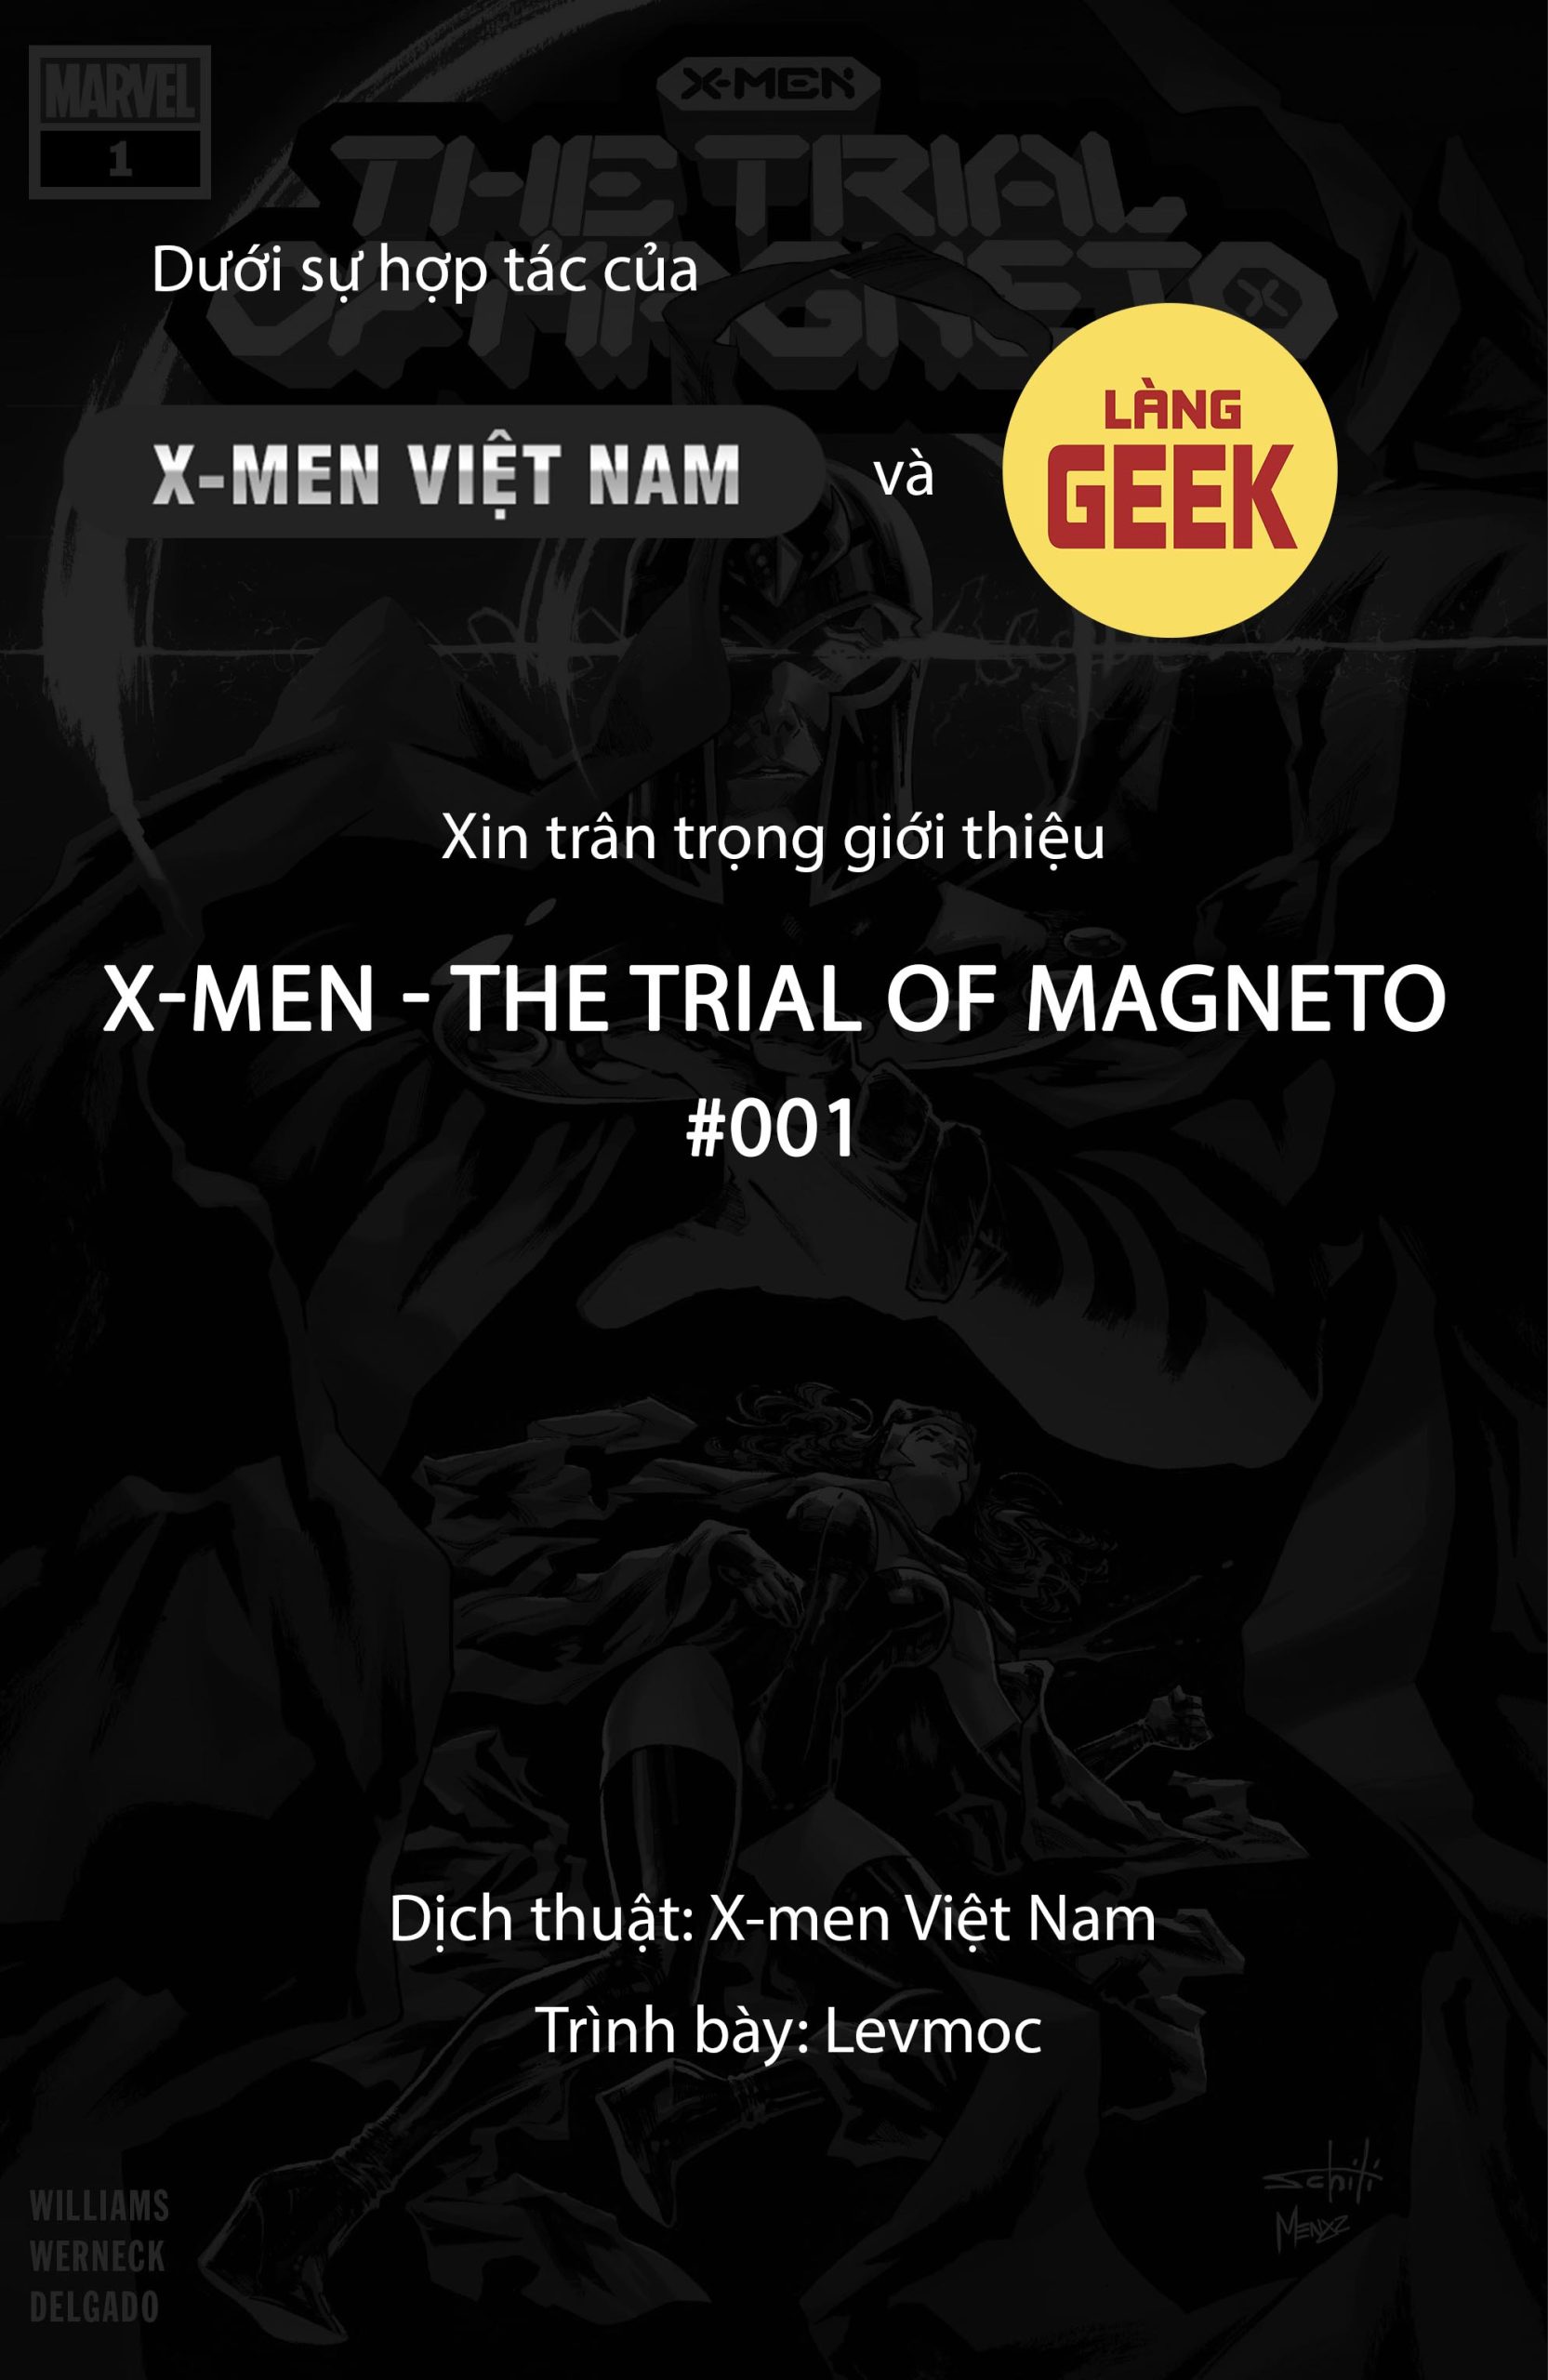 https://langgeek.net/wp-content/webpc-passthru.php?src=https://langgeek.net/wp-content/uploads/2022/03/X-Men-The-Trial-Of-Magneto-2021-01-of-05-000-1-1-scaled.jpg&nocache=1